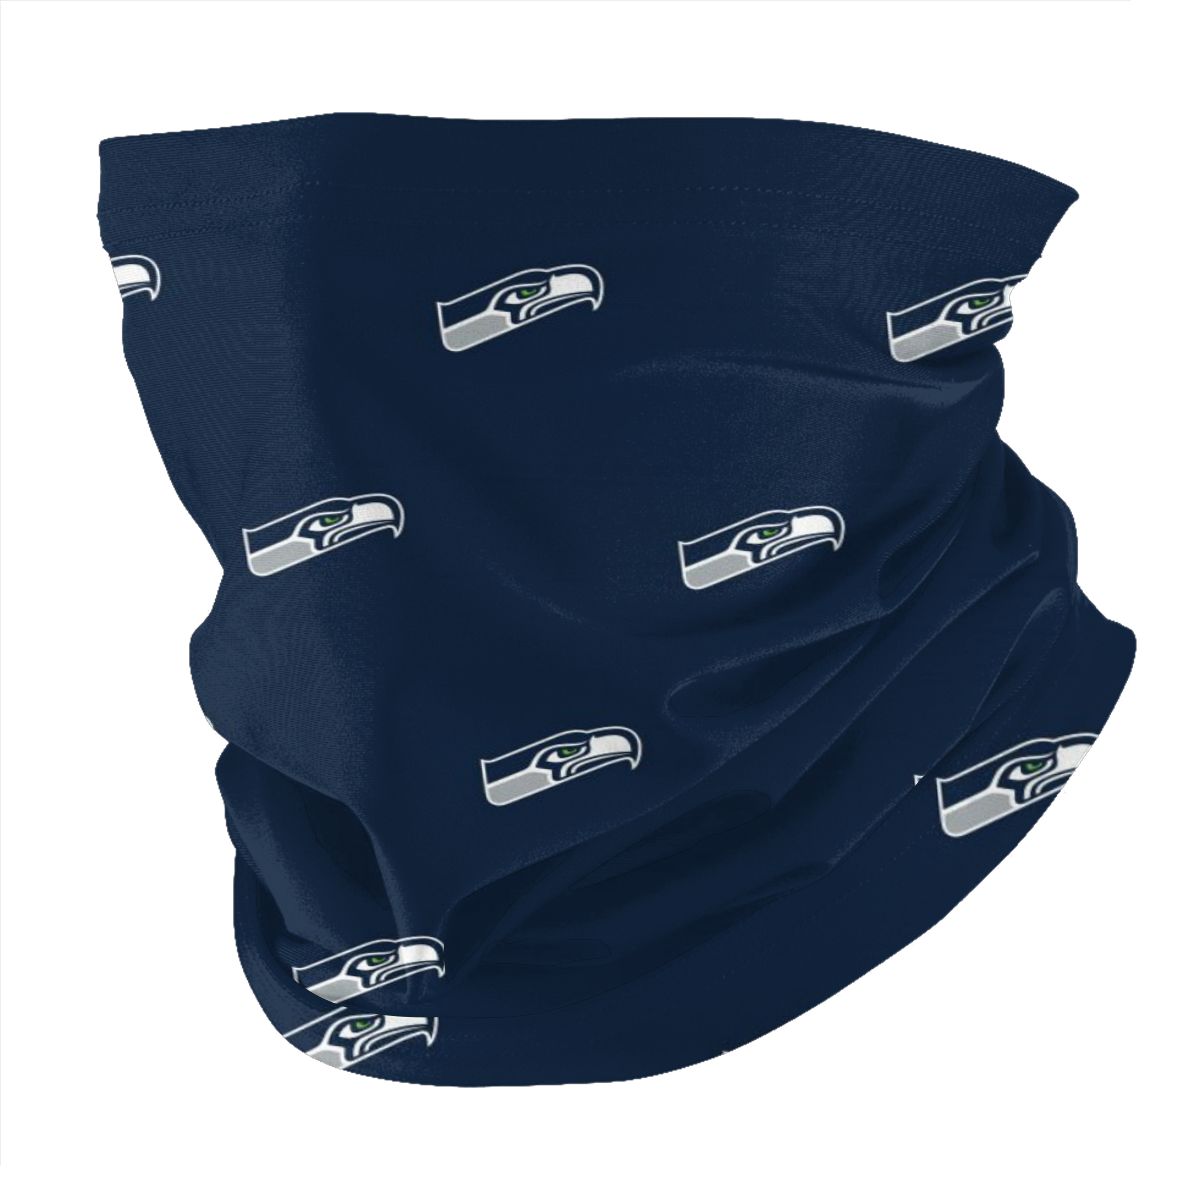 Reusble Mouth Cover Bandanas Seattle Seahawks Variety Head Scarf Face Mask With PM 2.5 Filter